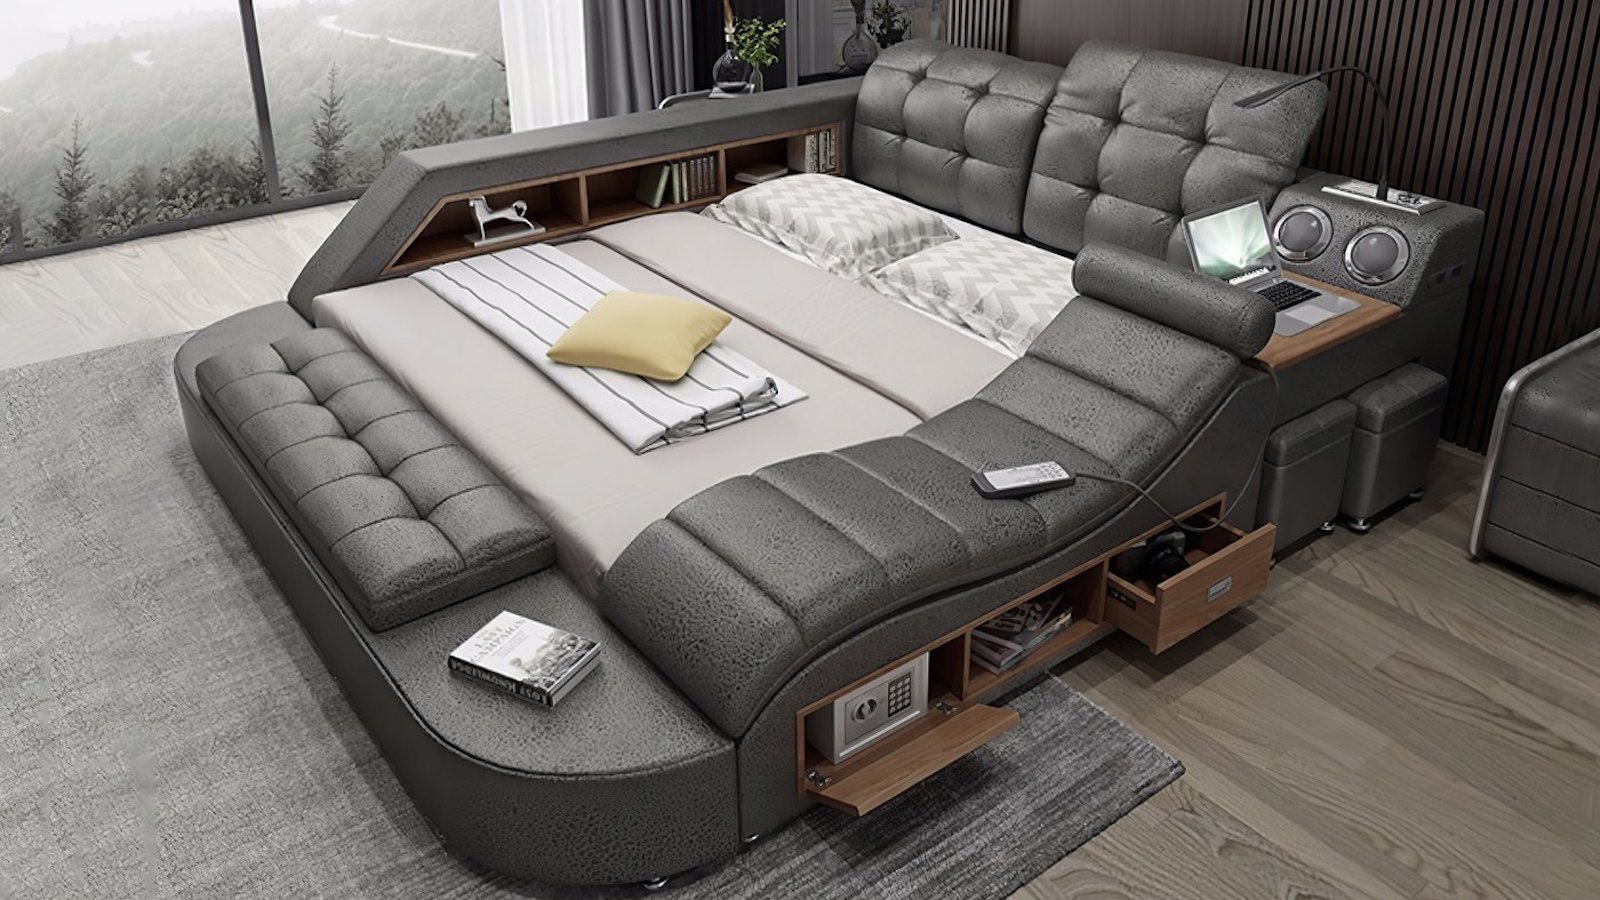 Hariana Tech Smart Ultimate Bed is a piece of all-in-one furniture with high-tech features